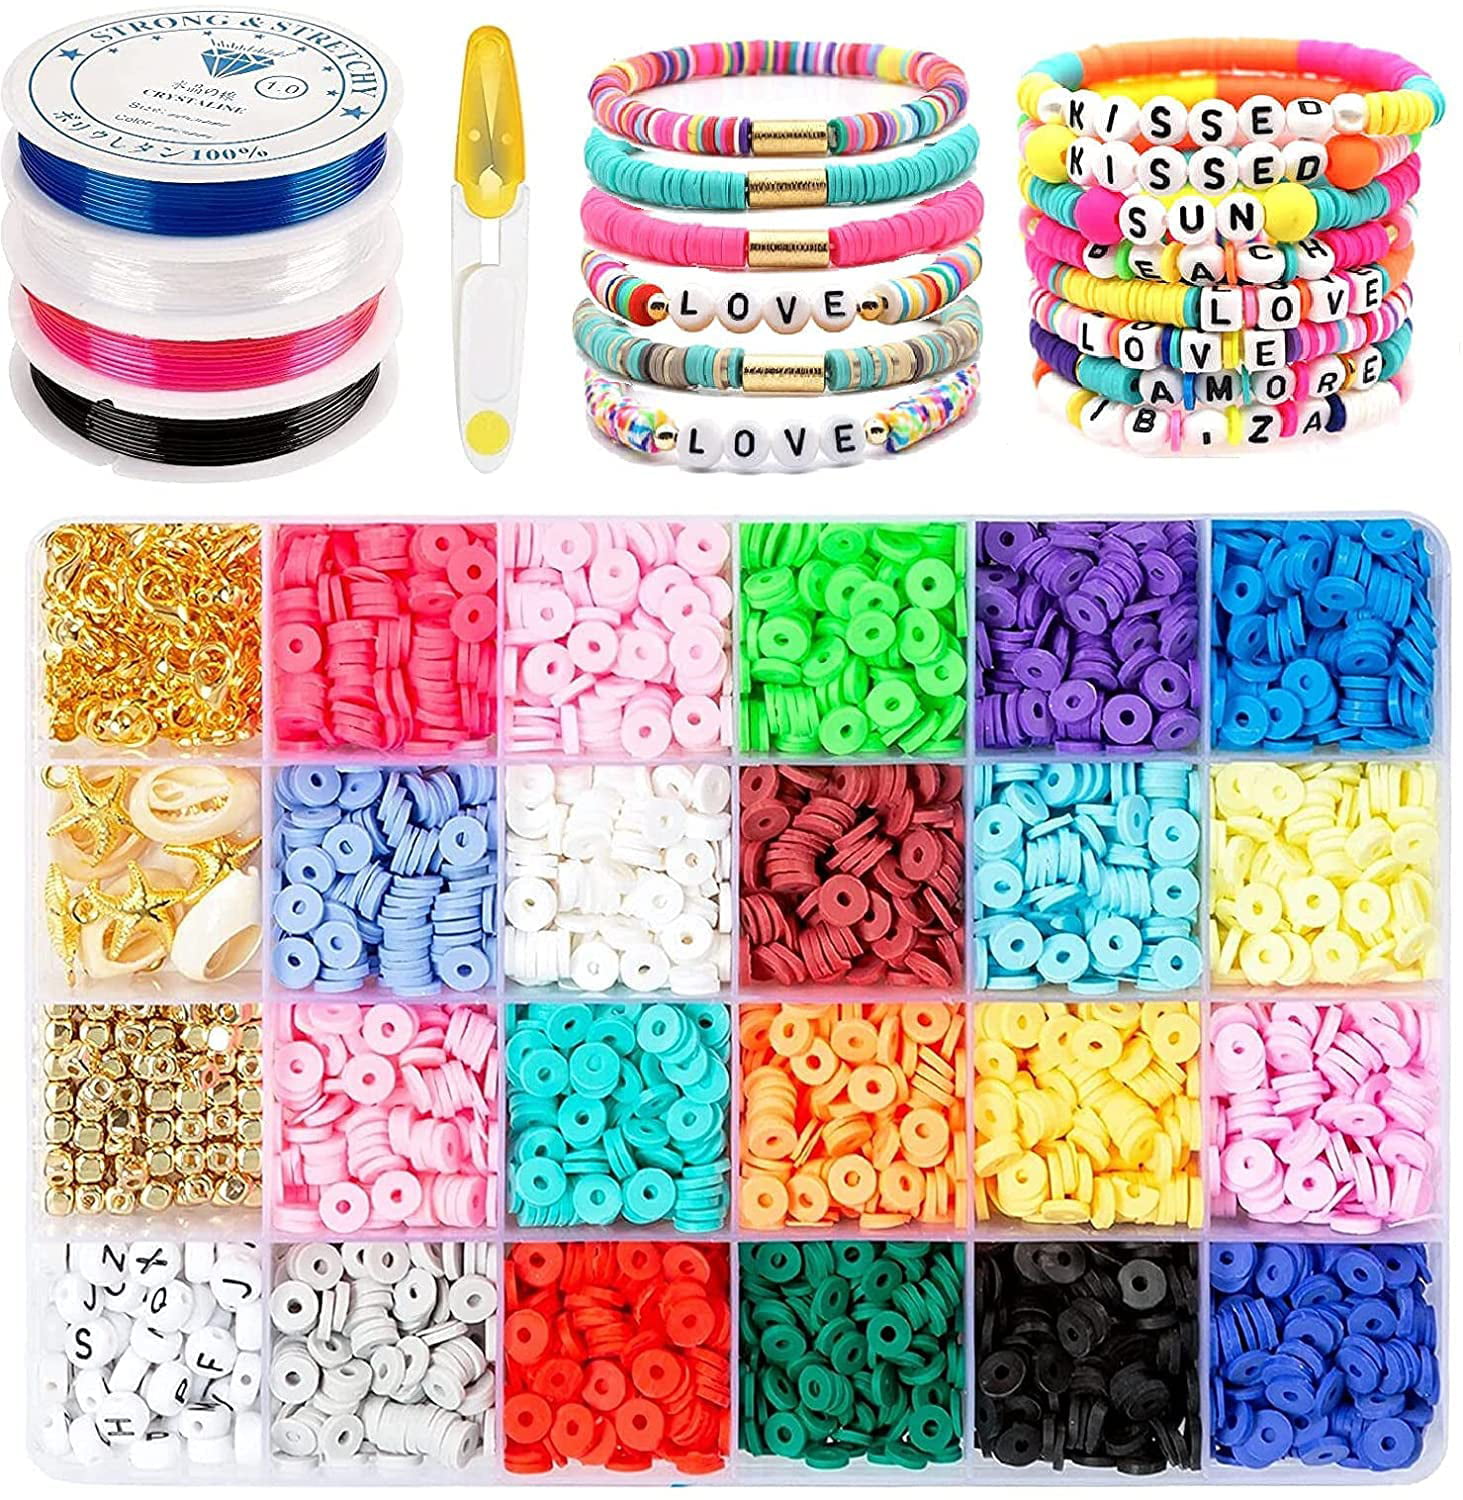 XJRLUK Clay Beads Bracelet Making Kit, 6 Boxes 20000+ PCS 144 Colors  Polymer Flat HEISHI Beads Kit for Jewelry Making, Crafts Gift for Girls  Ages 6-12